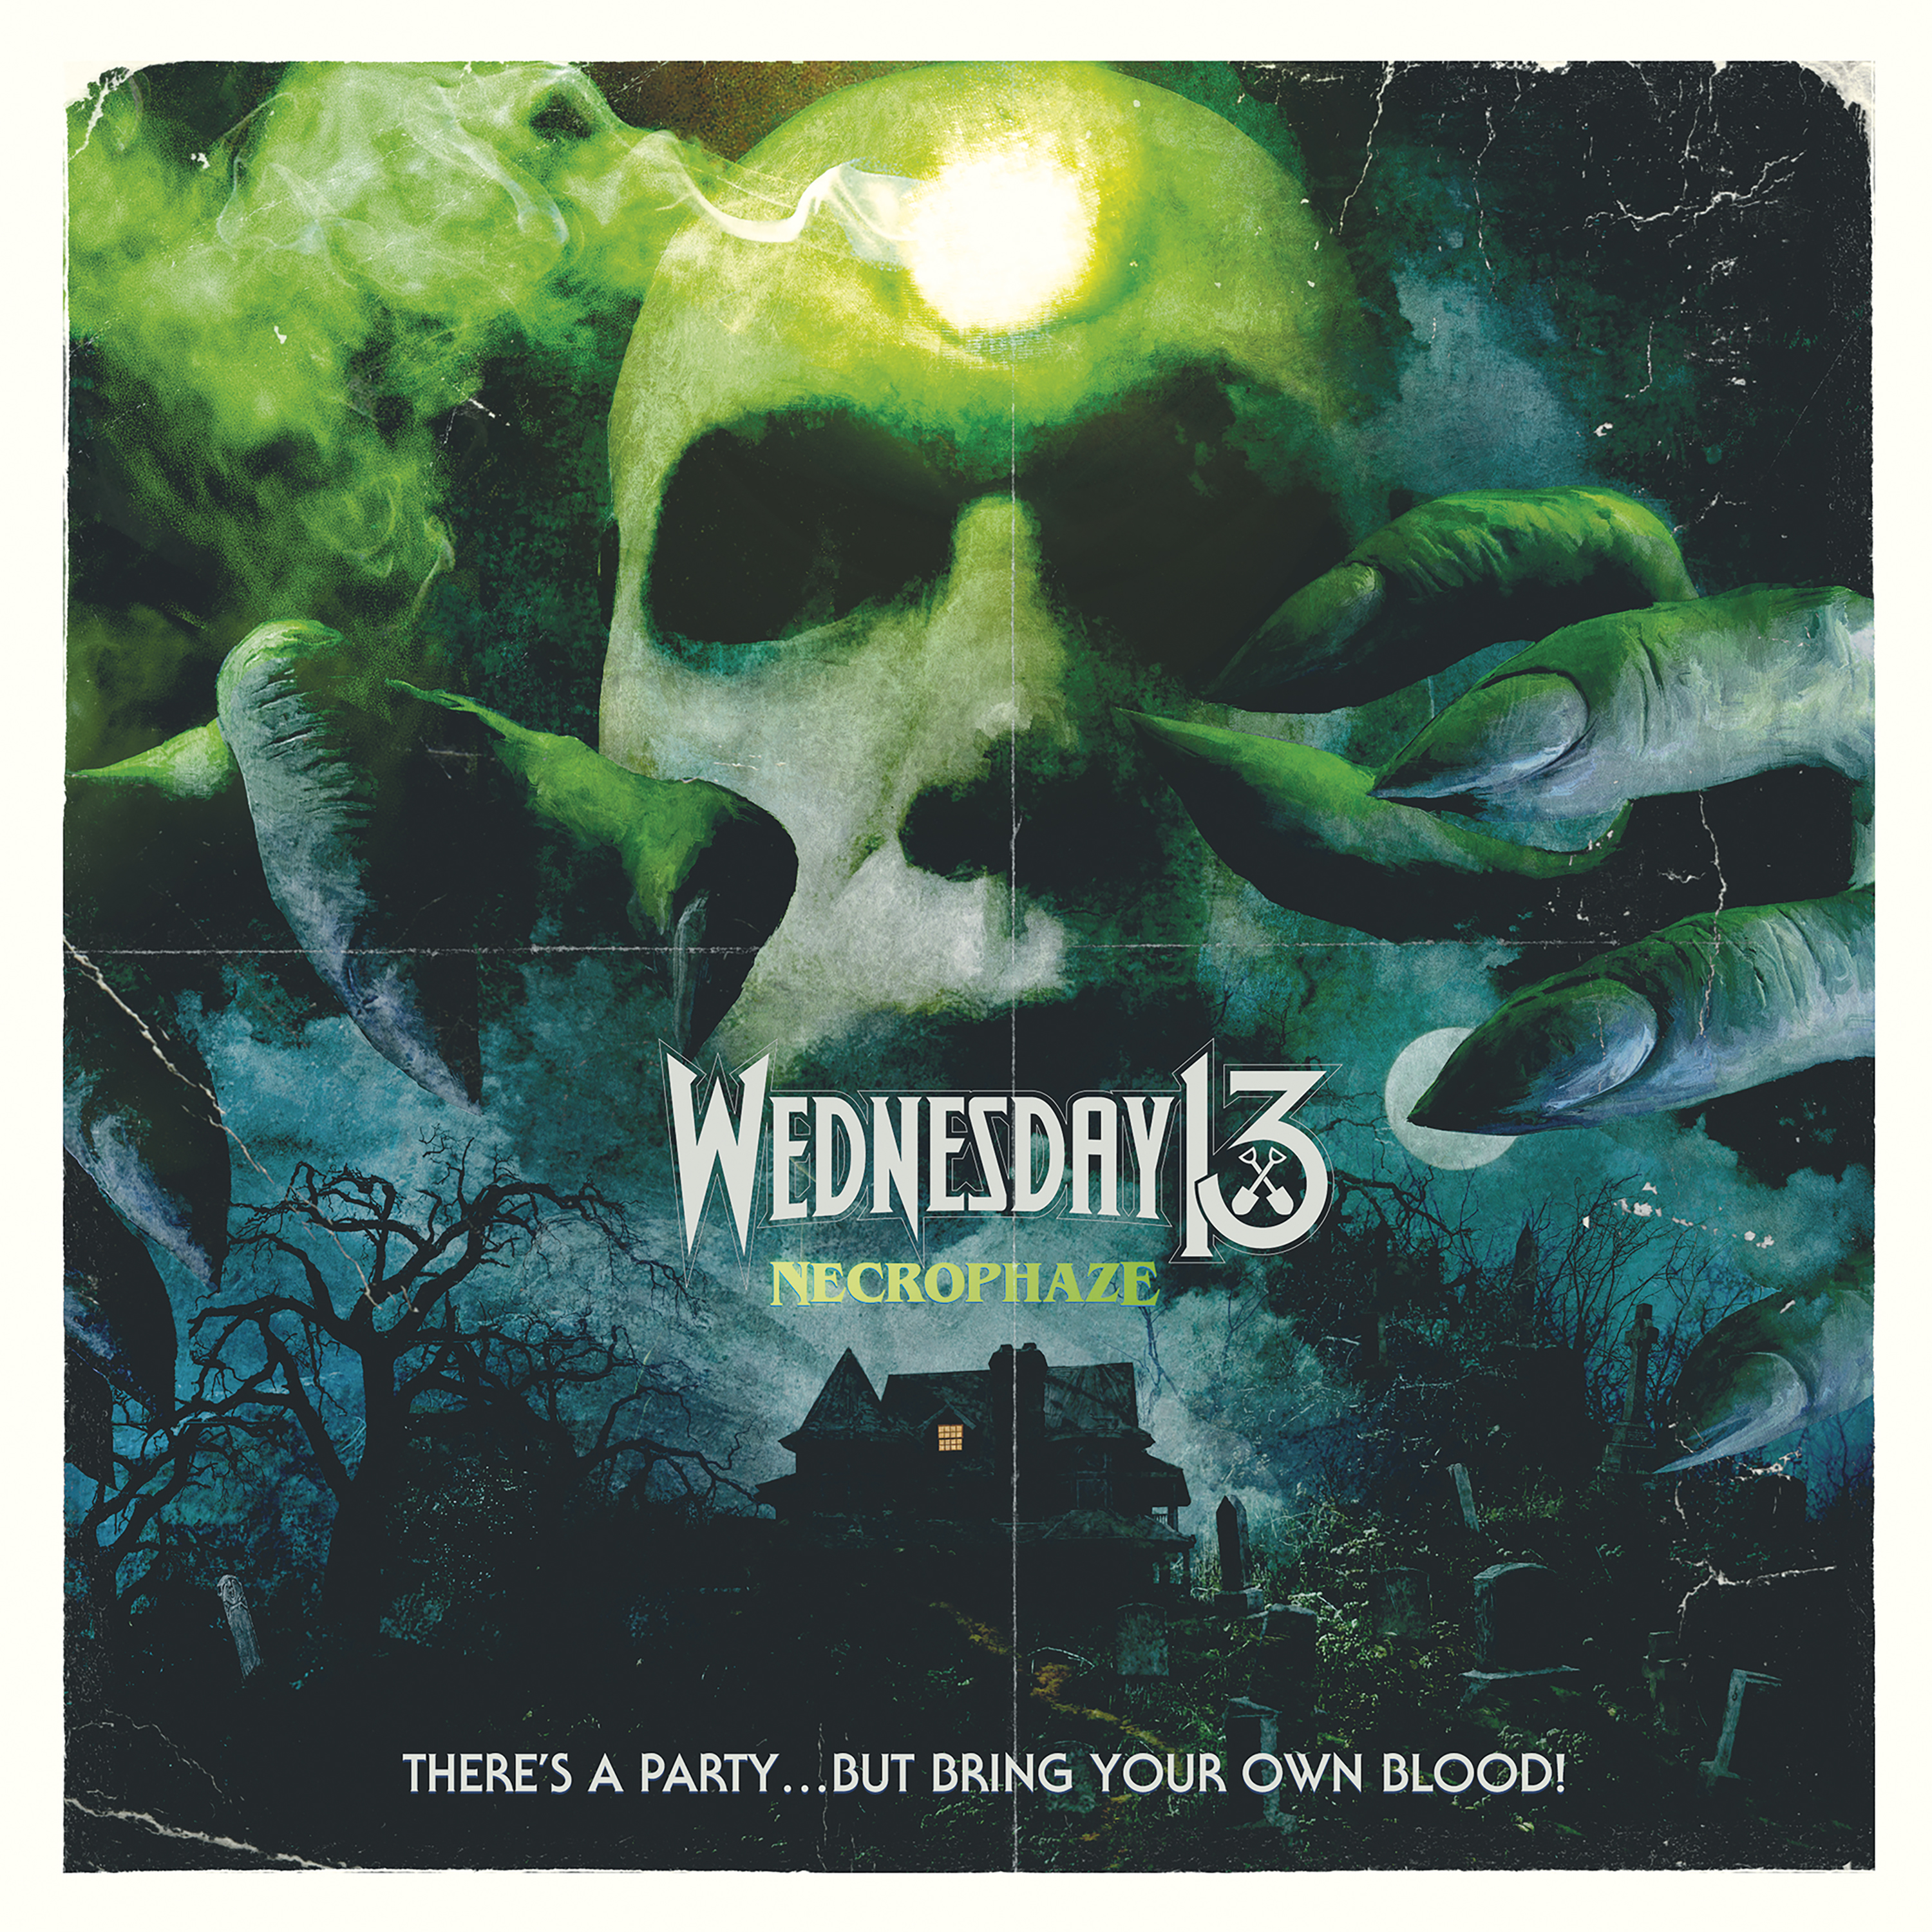 Wednesday 13 is Back with Necrophaze